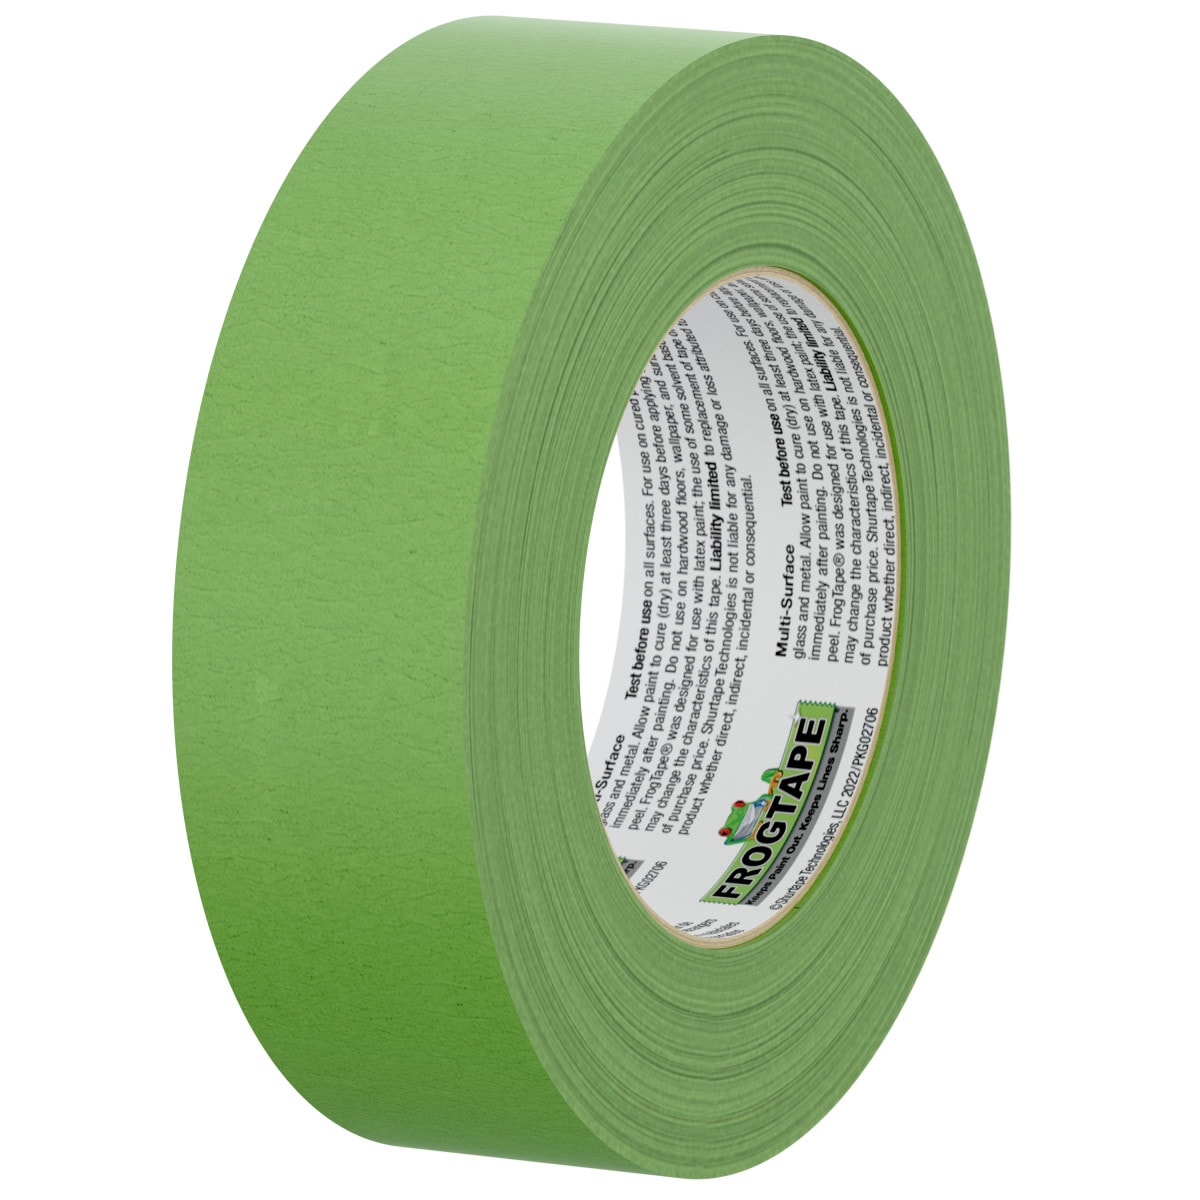 FrogTape 0.94 in. x 60 yd. Green Multi-surface Painting Tape, 2 Pack